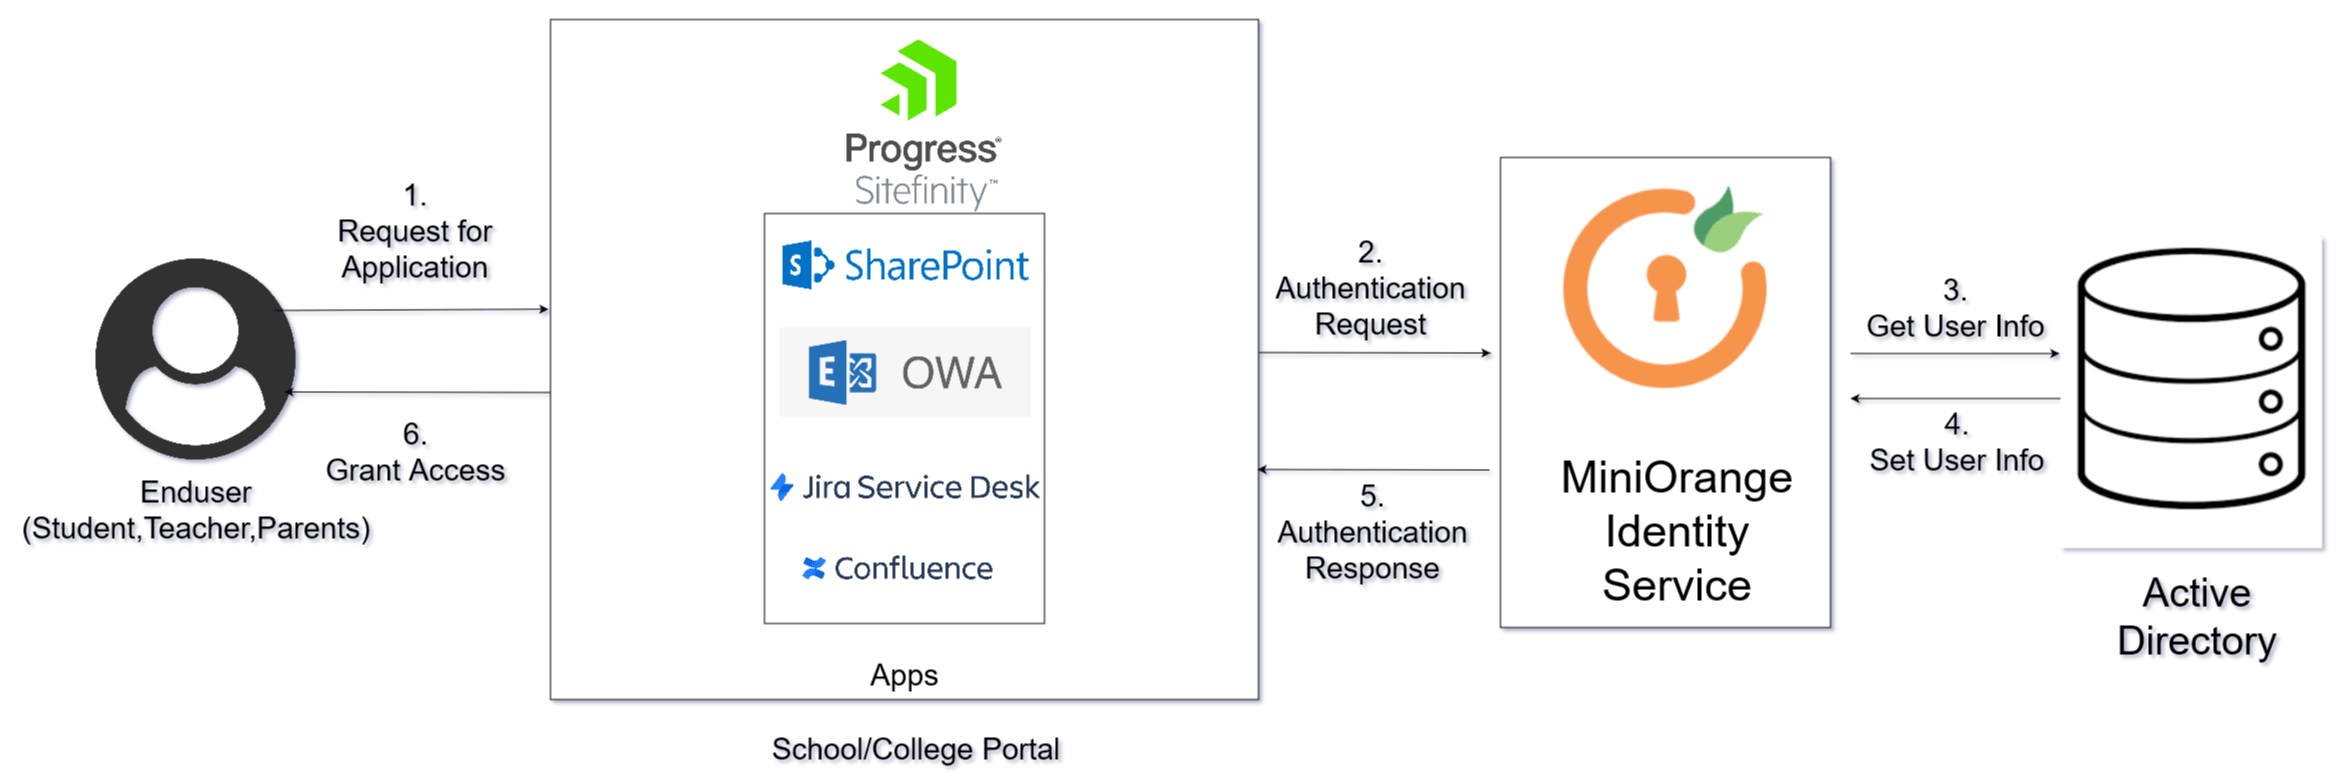 Single Sign-On (SSO) for Education flow